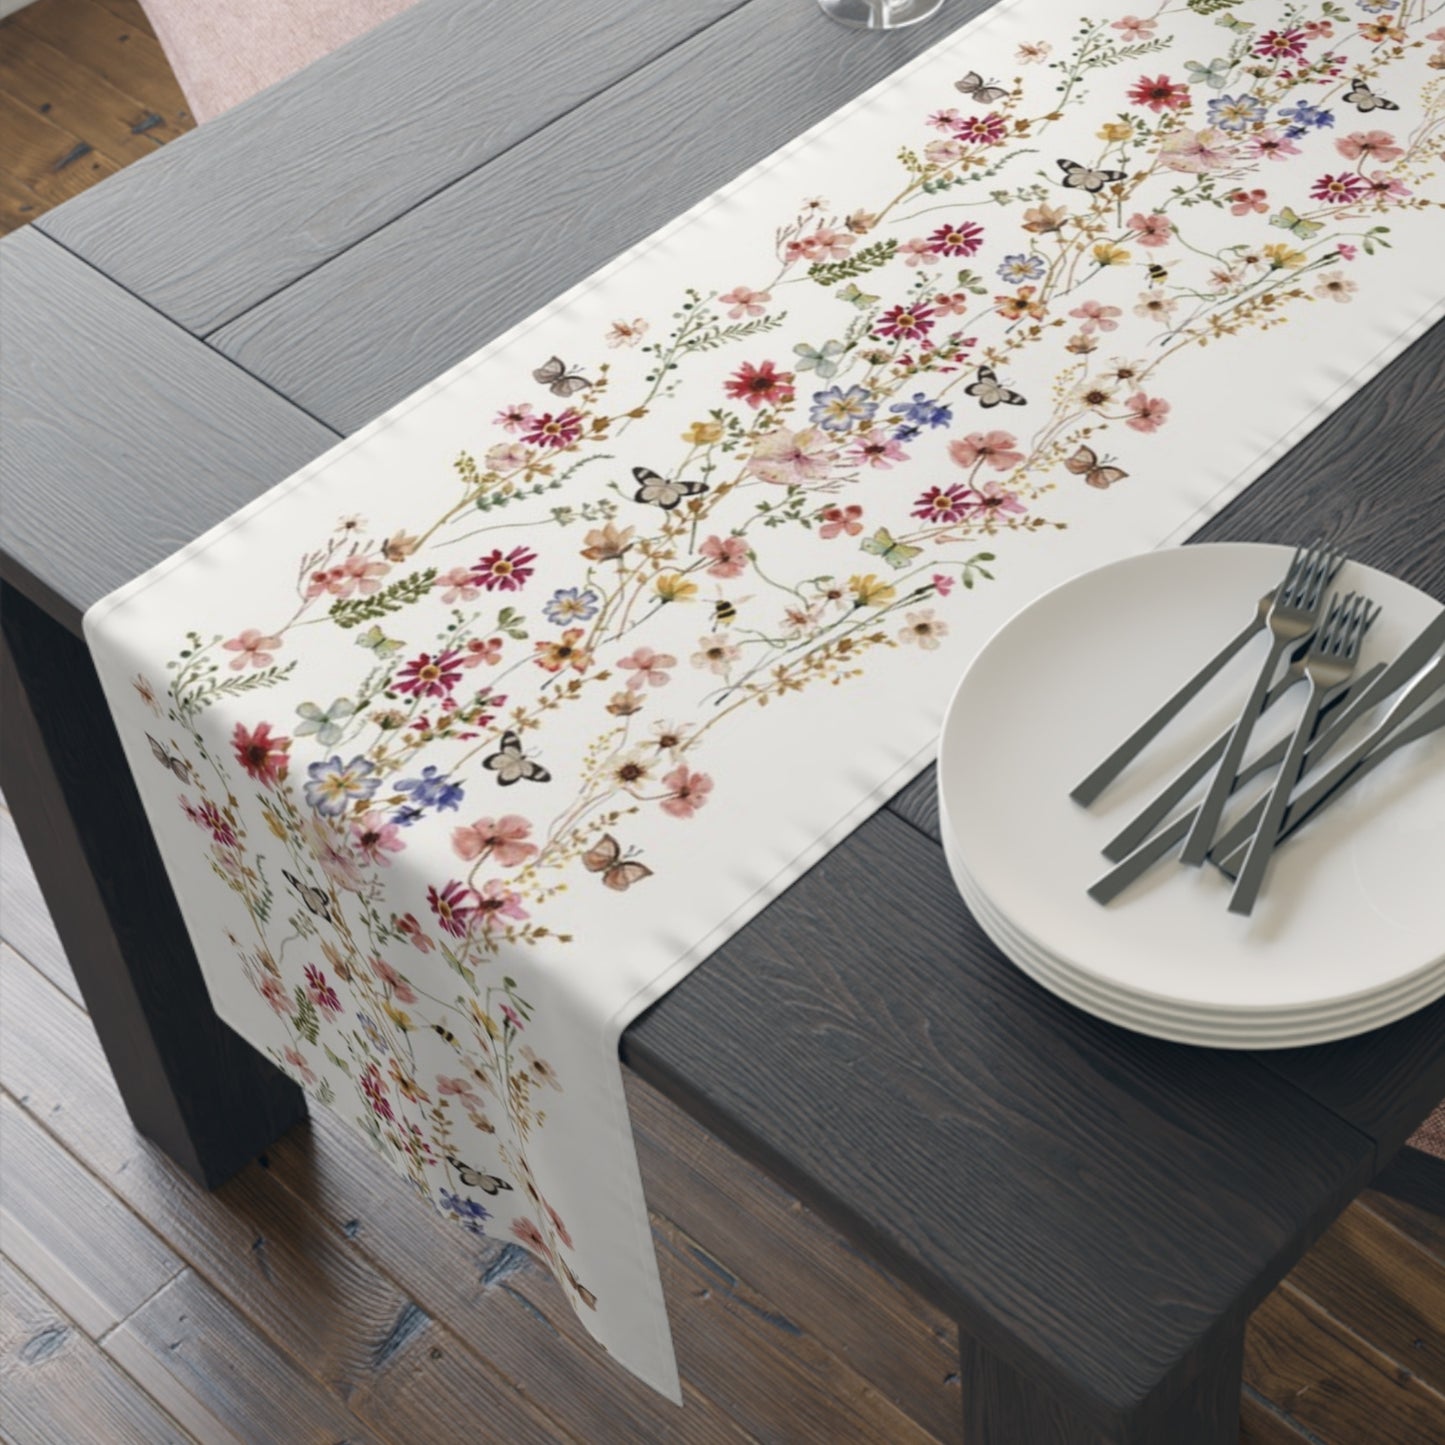 black wood table with Watercolor Pressed & Dried Wildflowers TABLE RUNNER from Blue Water Songs on it